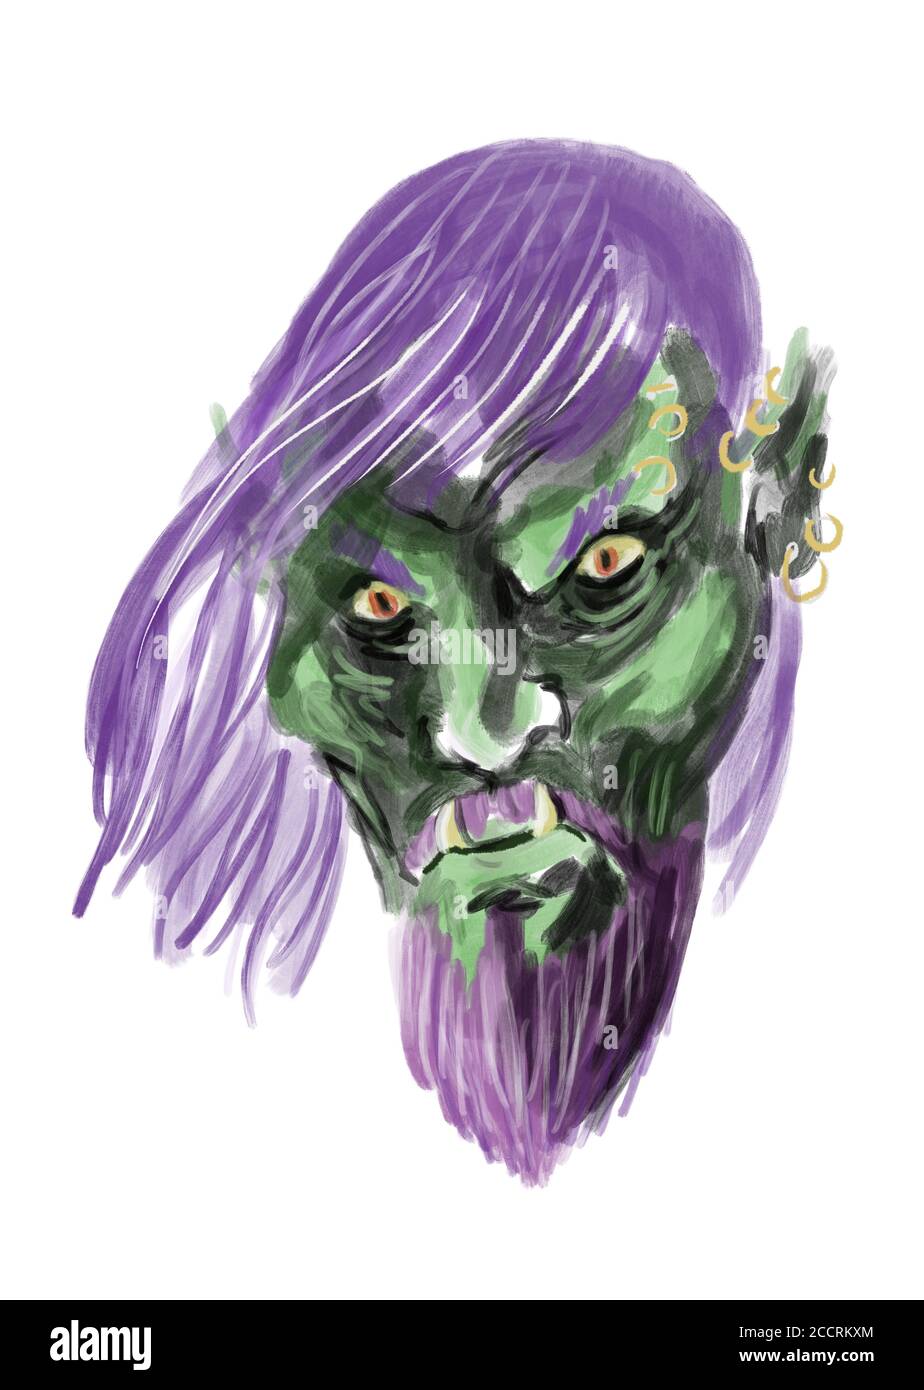 Illustration of a fantasy Orc character Stock Photo